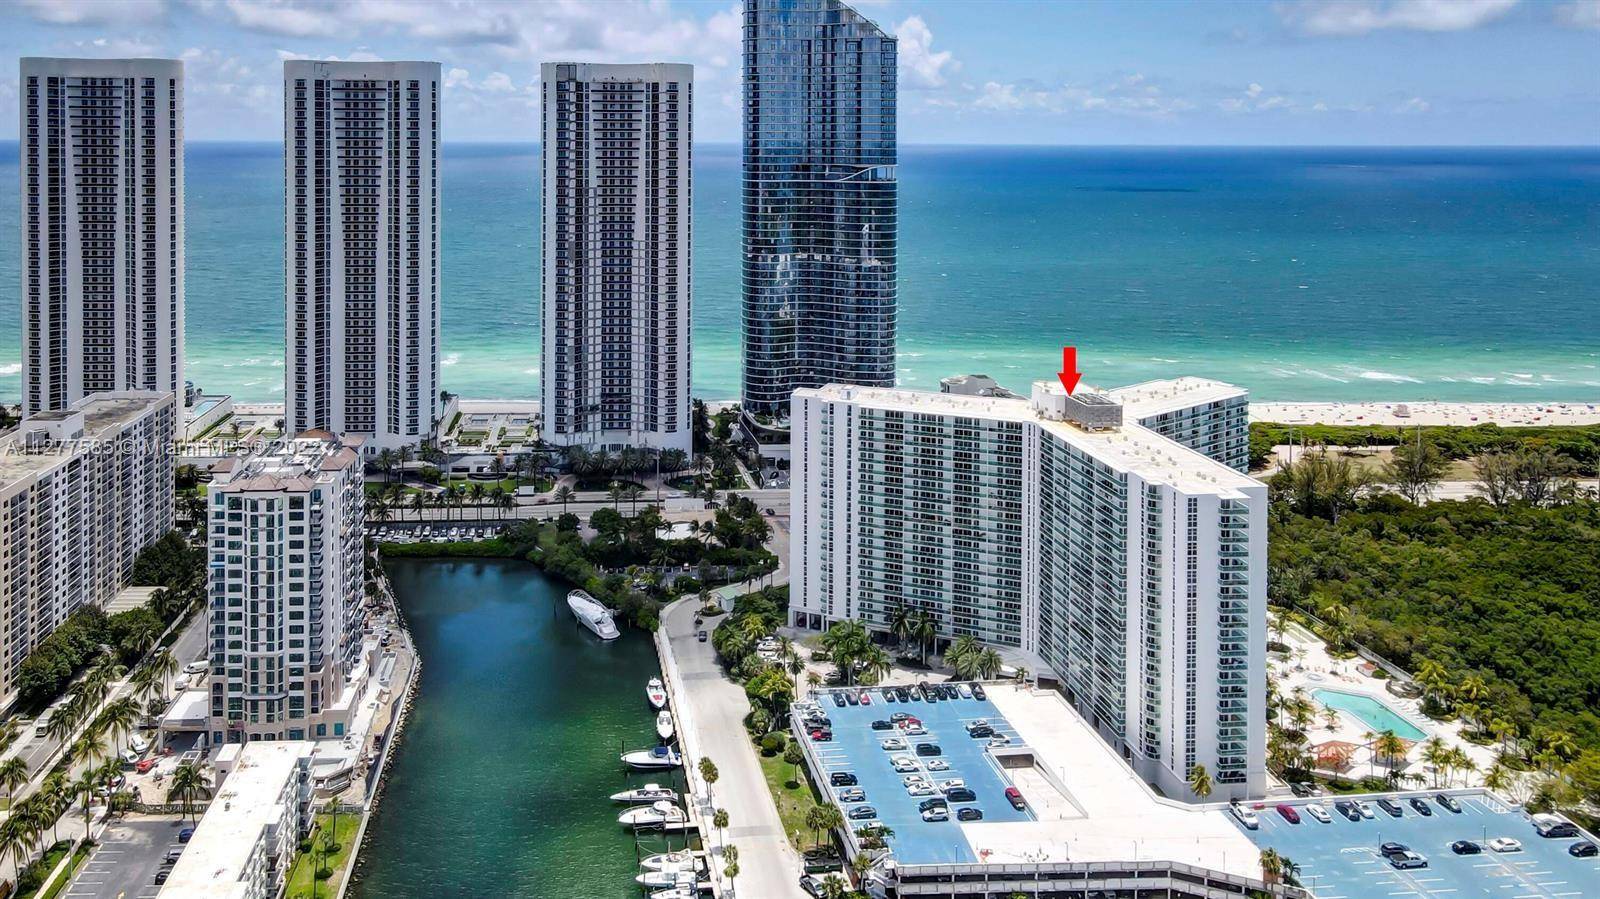 BEAUTIFUL 2 BED 2 BATH SPACIOUS APARTMENT NEW KITCHEN GRANITE COUNTERTOPS STAINLESS STEAL APPLIANCES LOTS OF CLOSETS HIGH IMPACT GLASS, HURRICAINE PROVE FREHSLY PAINTED ACROSS OF THE OCEAN BUILDING IS ...